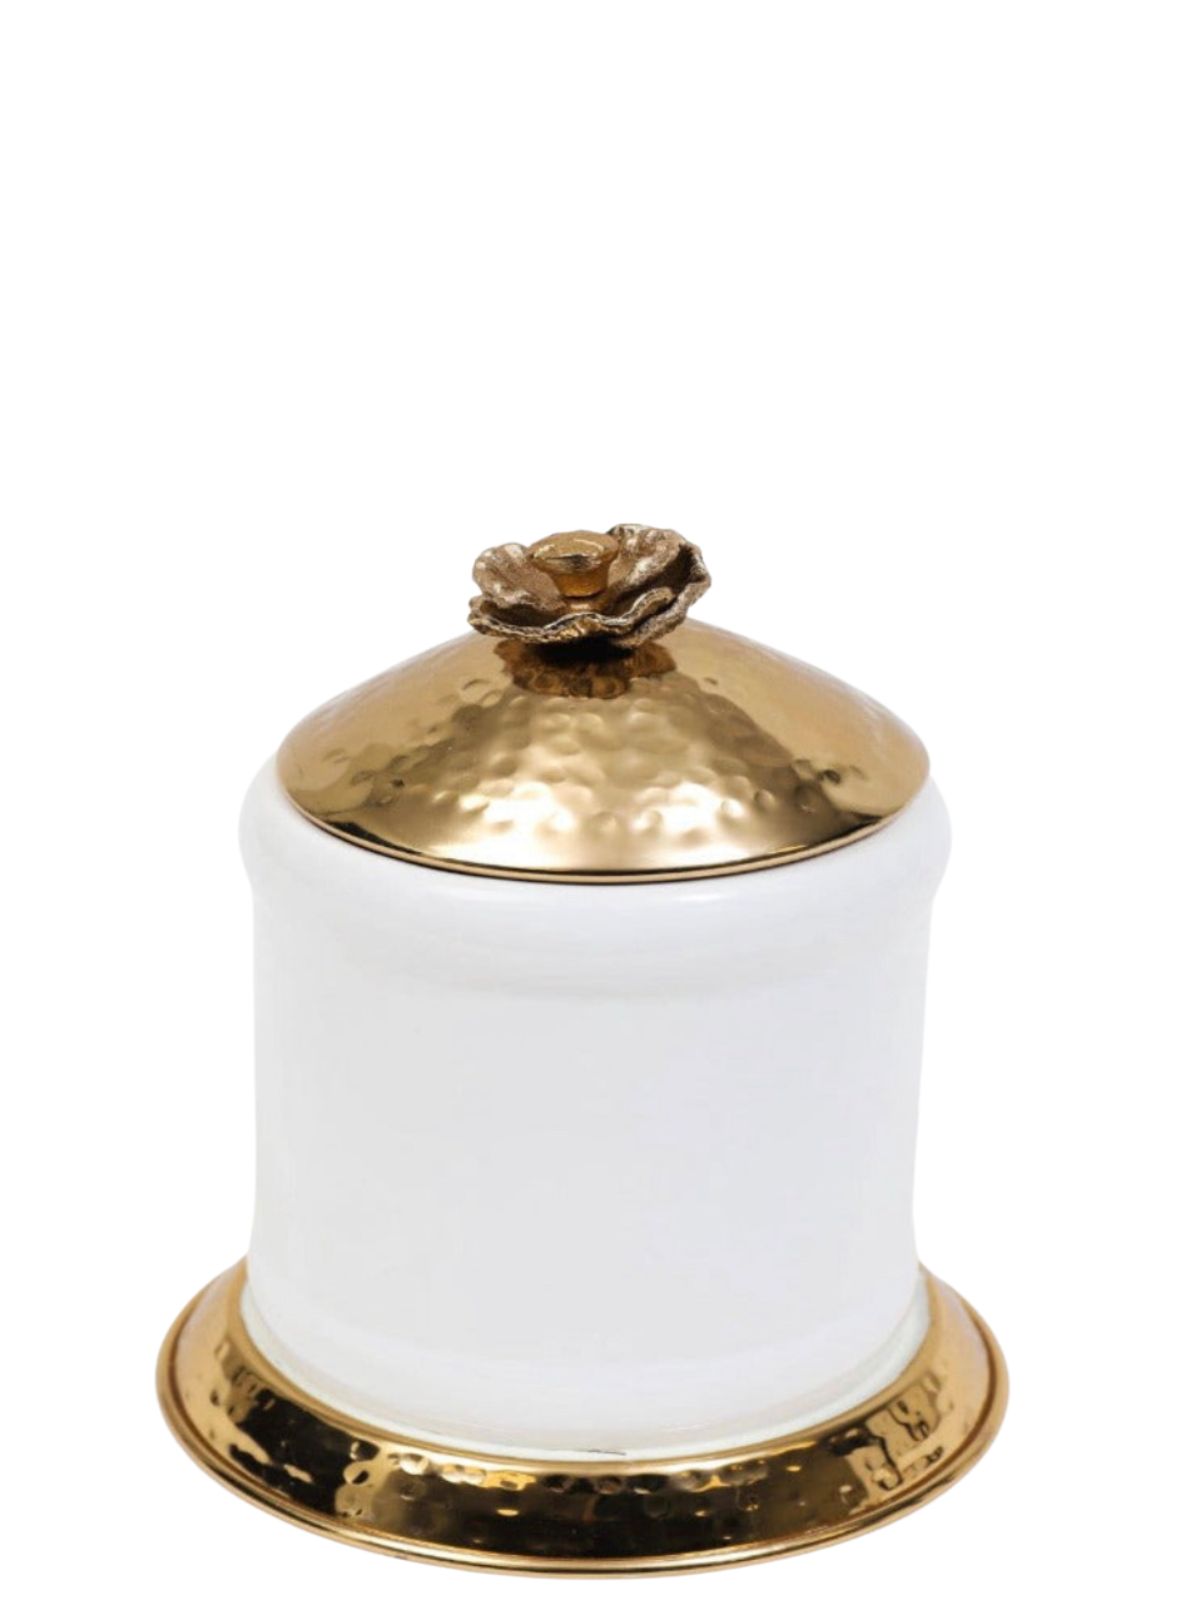 8H Luxury white ceramic canisters with gold base and gold hammered lid with floral details - KYA Home Decor.